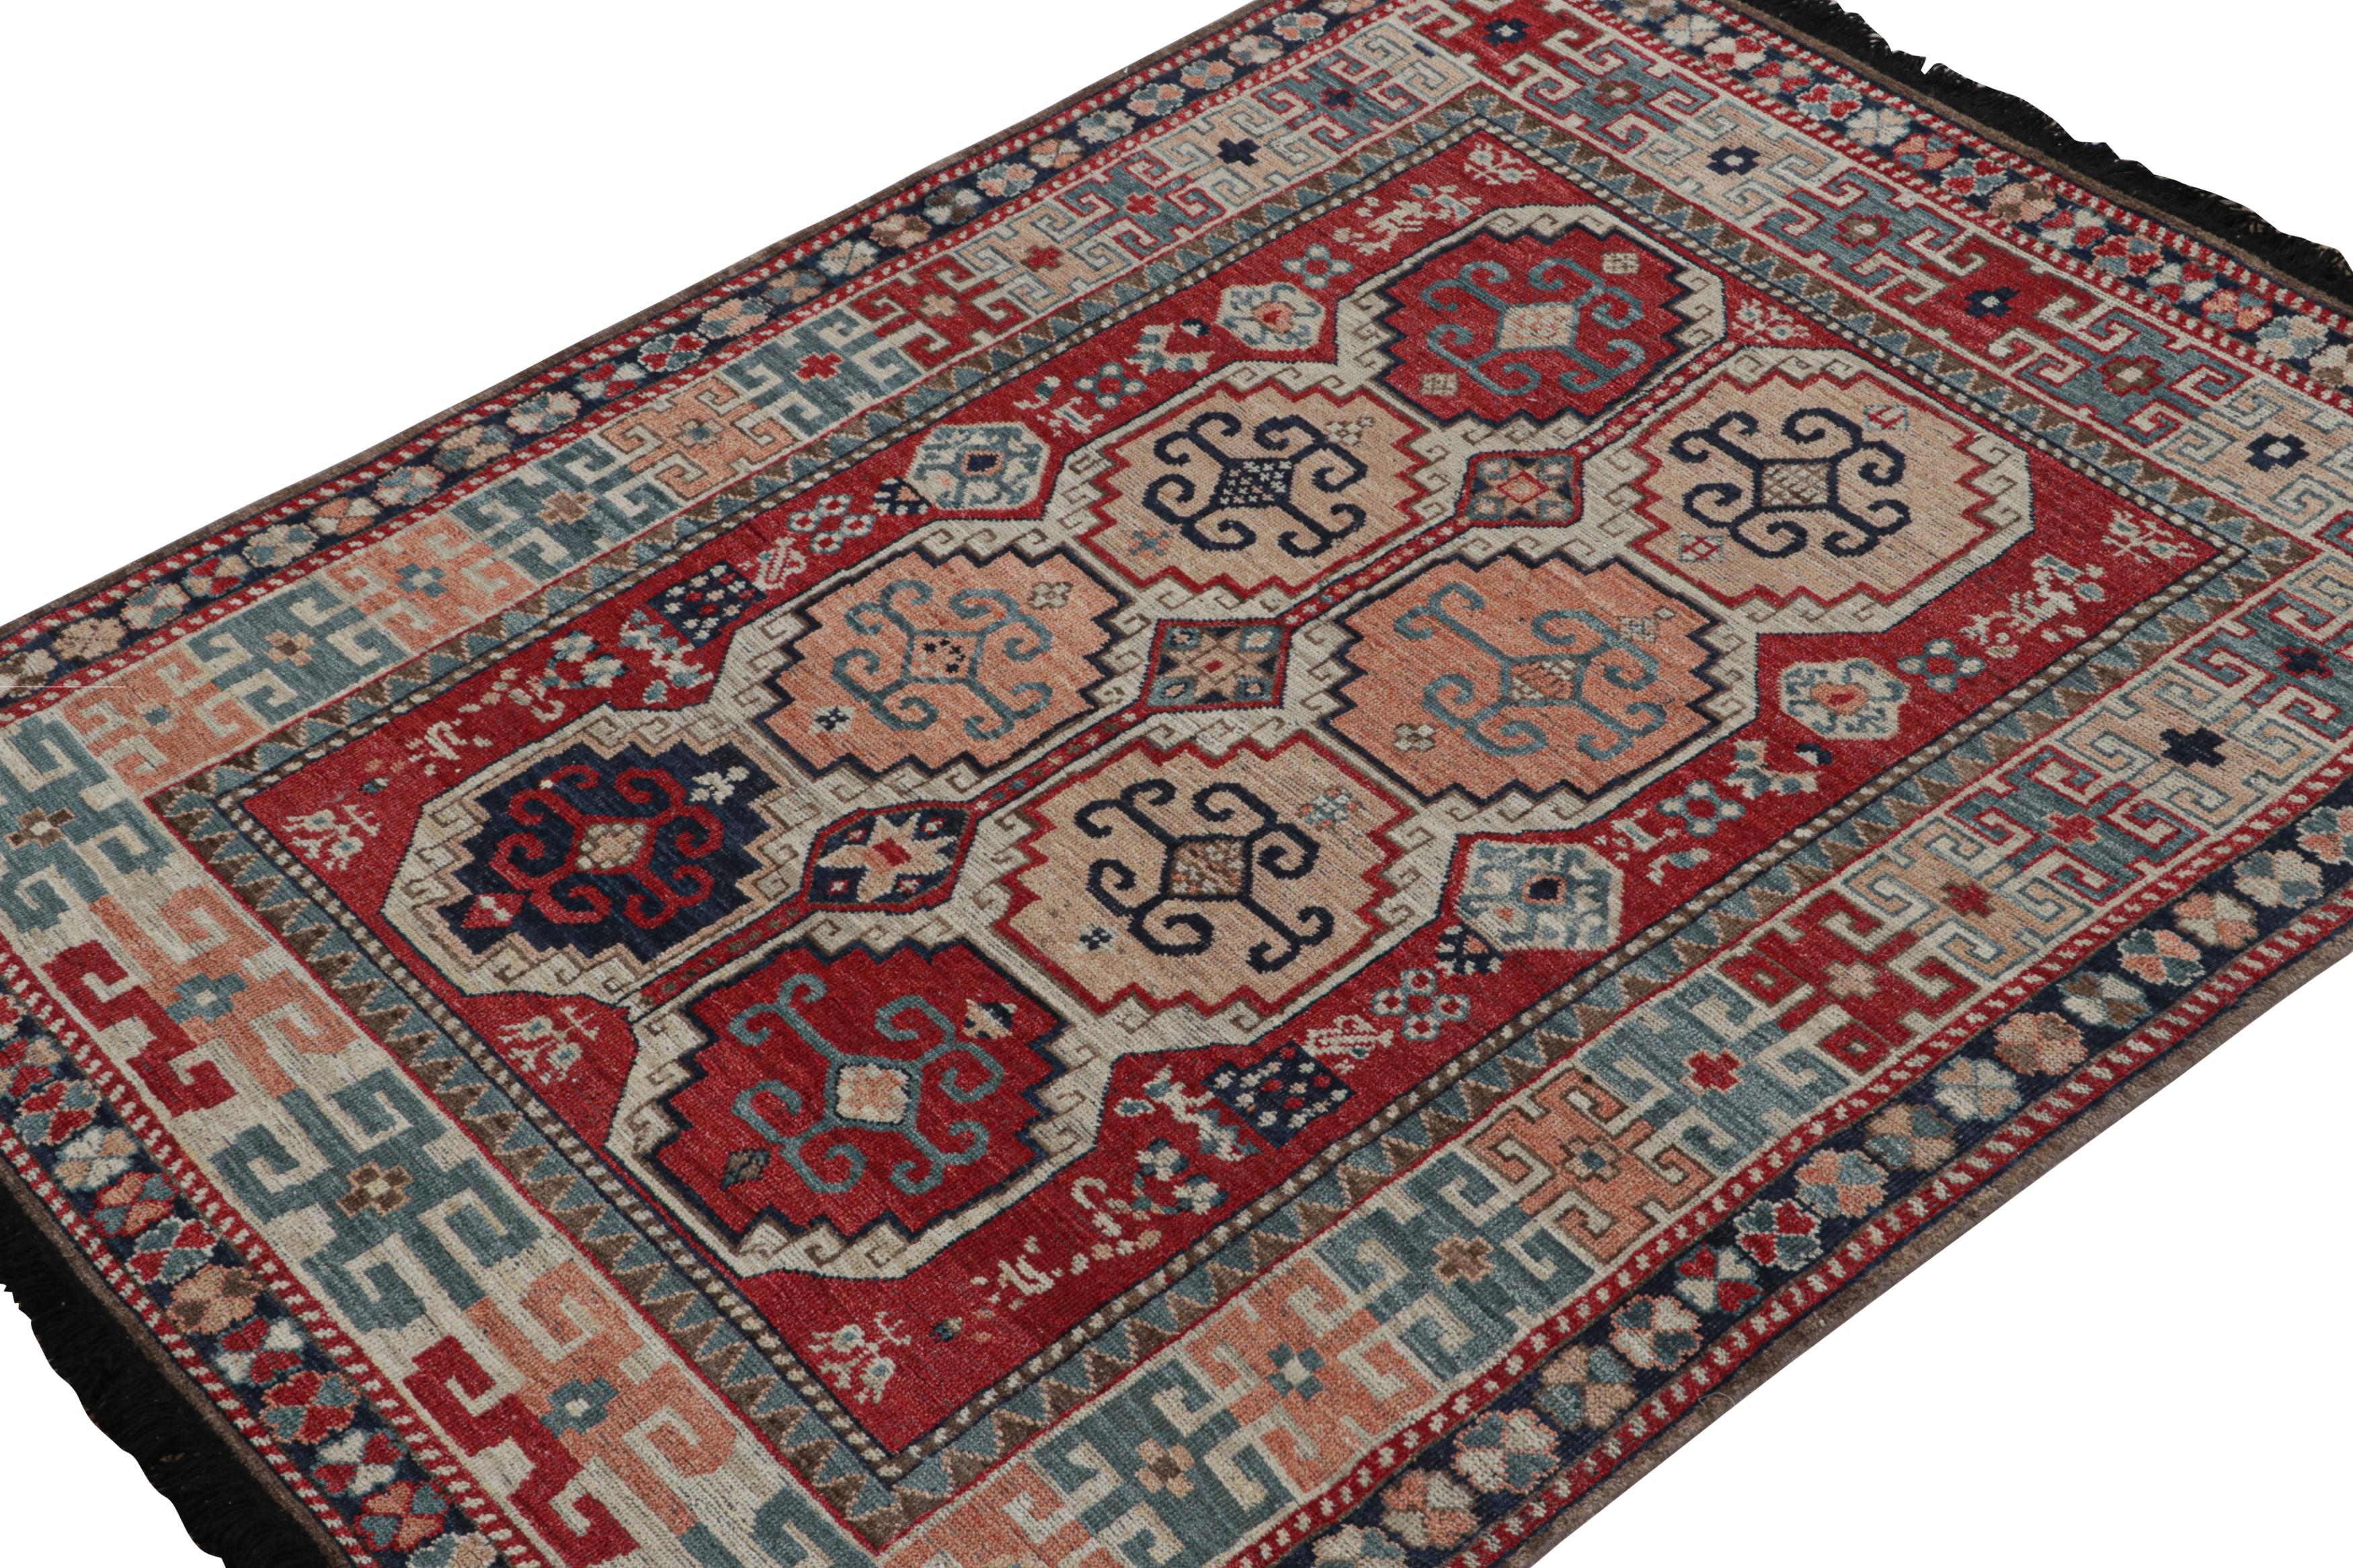 This 5x7 rug is a new entry to Rug & Kilim’s Burano collection. Hand-knotted in wool.

On the Design: 

Inspired by antique tribal rugs, this rug revels in blue & red with defined movement and traditional sensibility. Keen eyes will admire the play